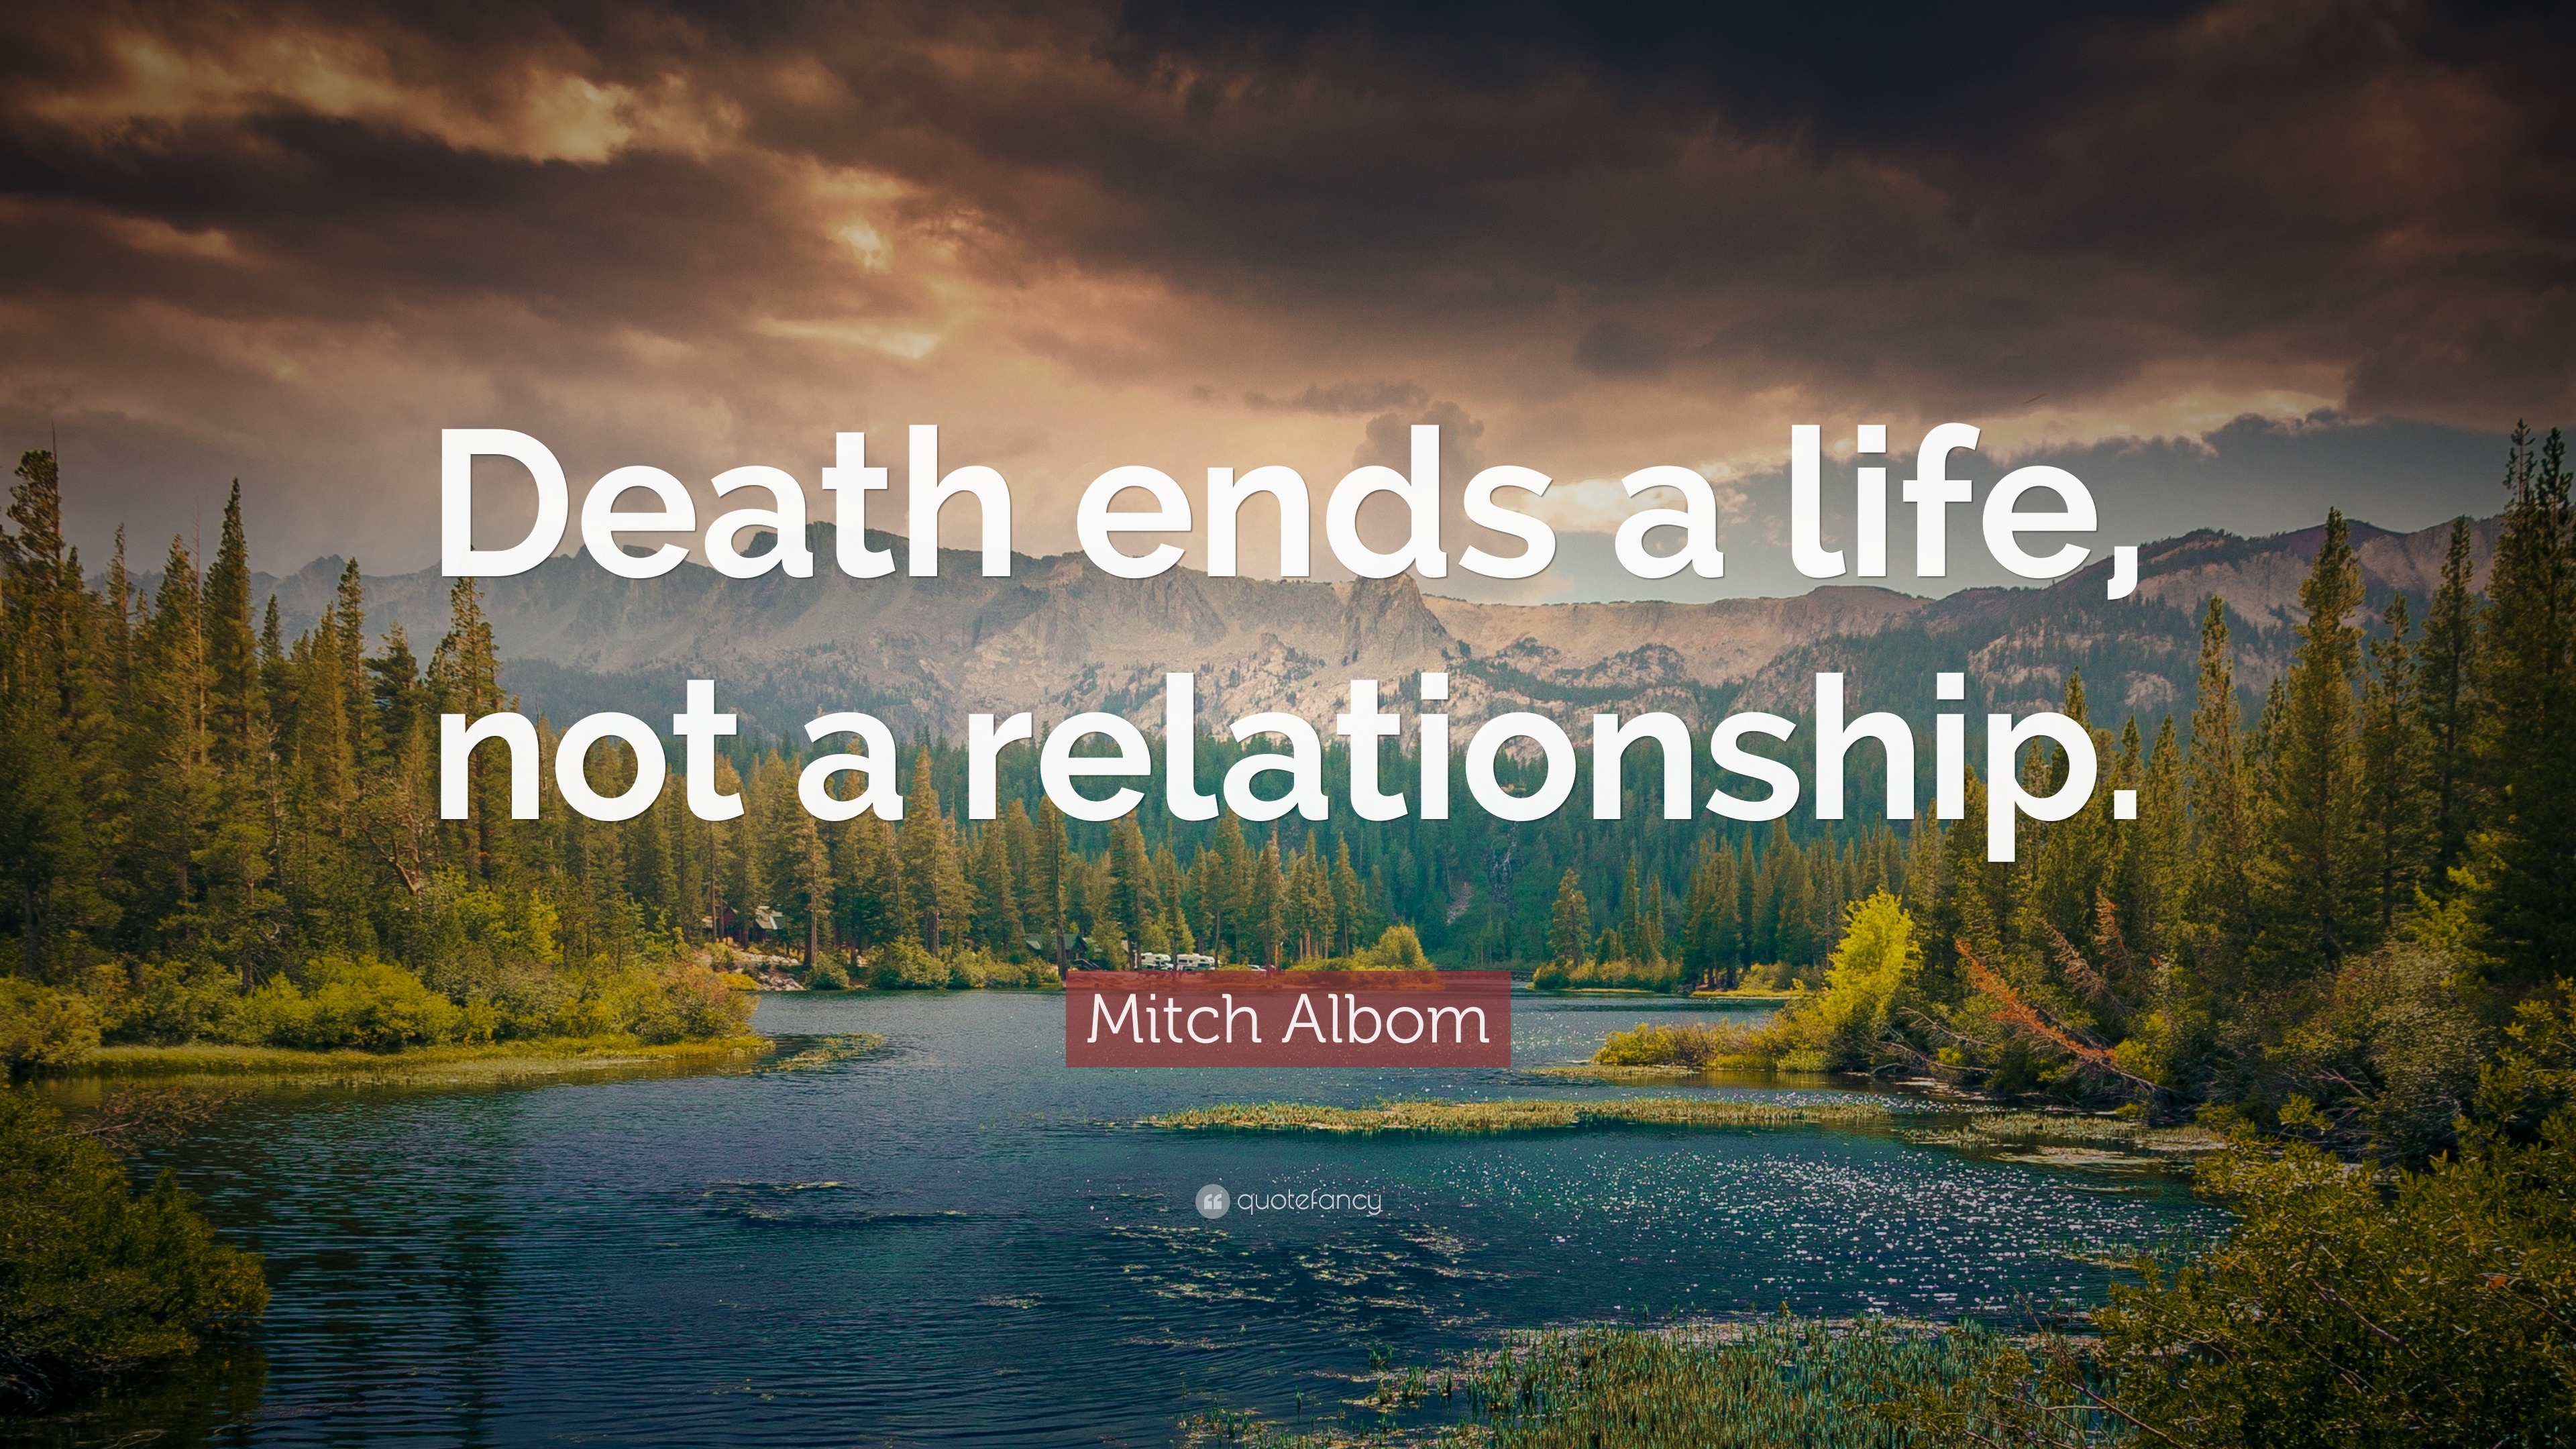 Mitch Albom Quote “Death ends a life not a relationship ”